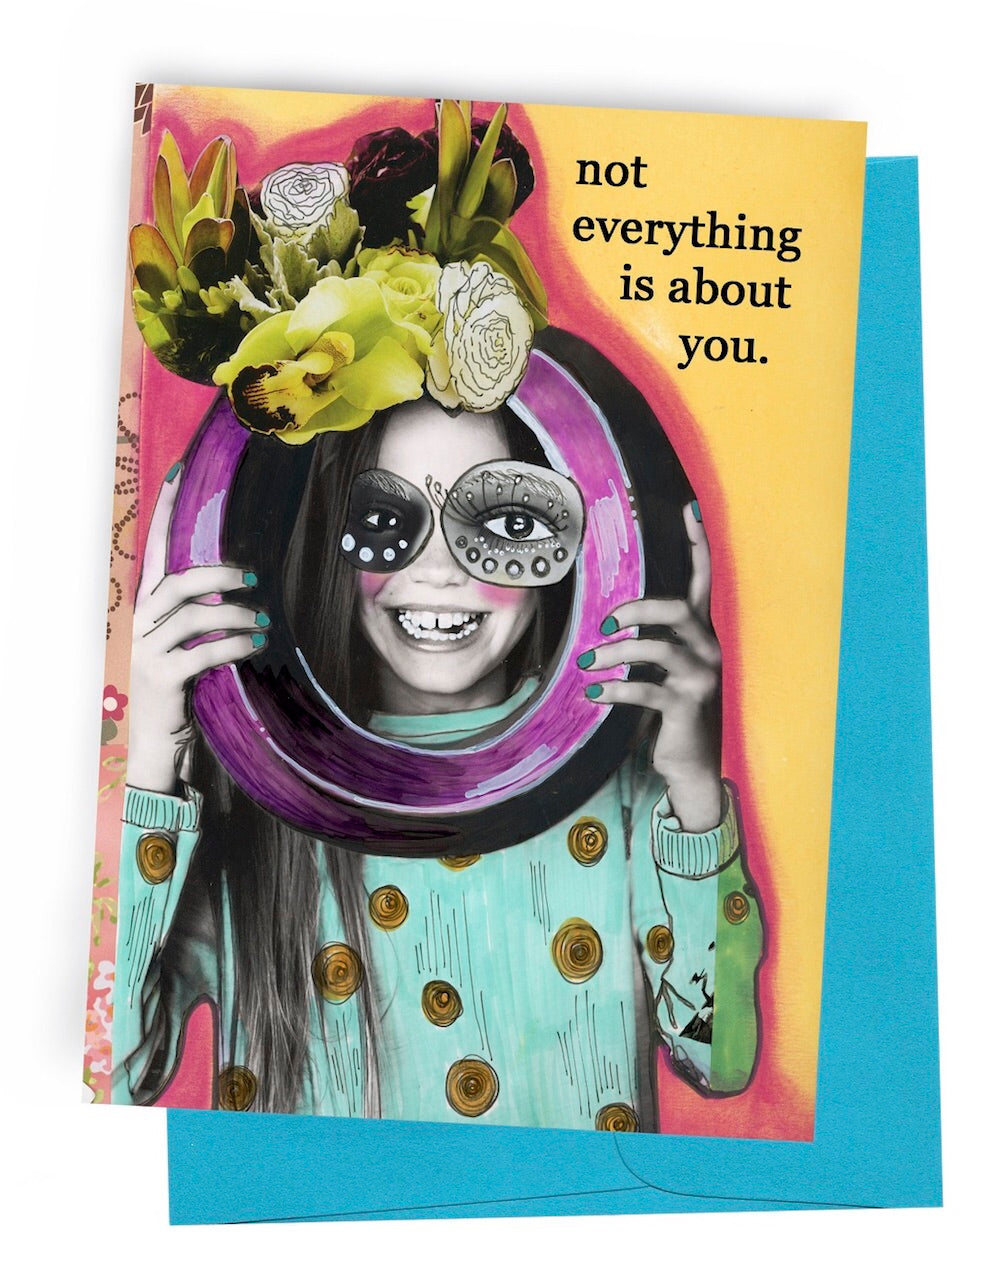 Not everything is about you Birthday card     Snarky  Greeting Card by Erin Smith